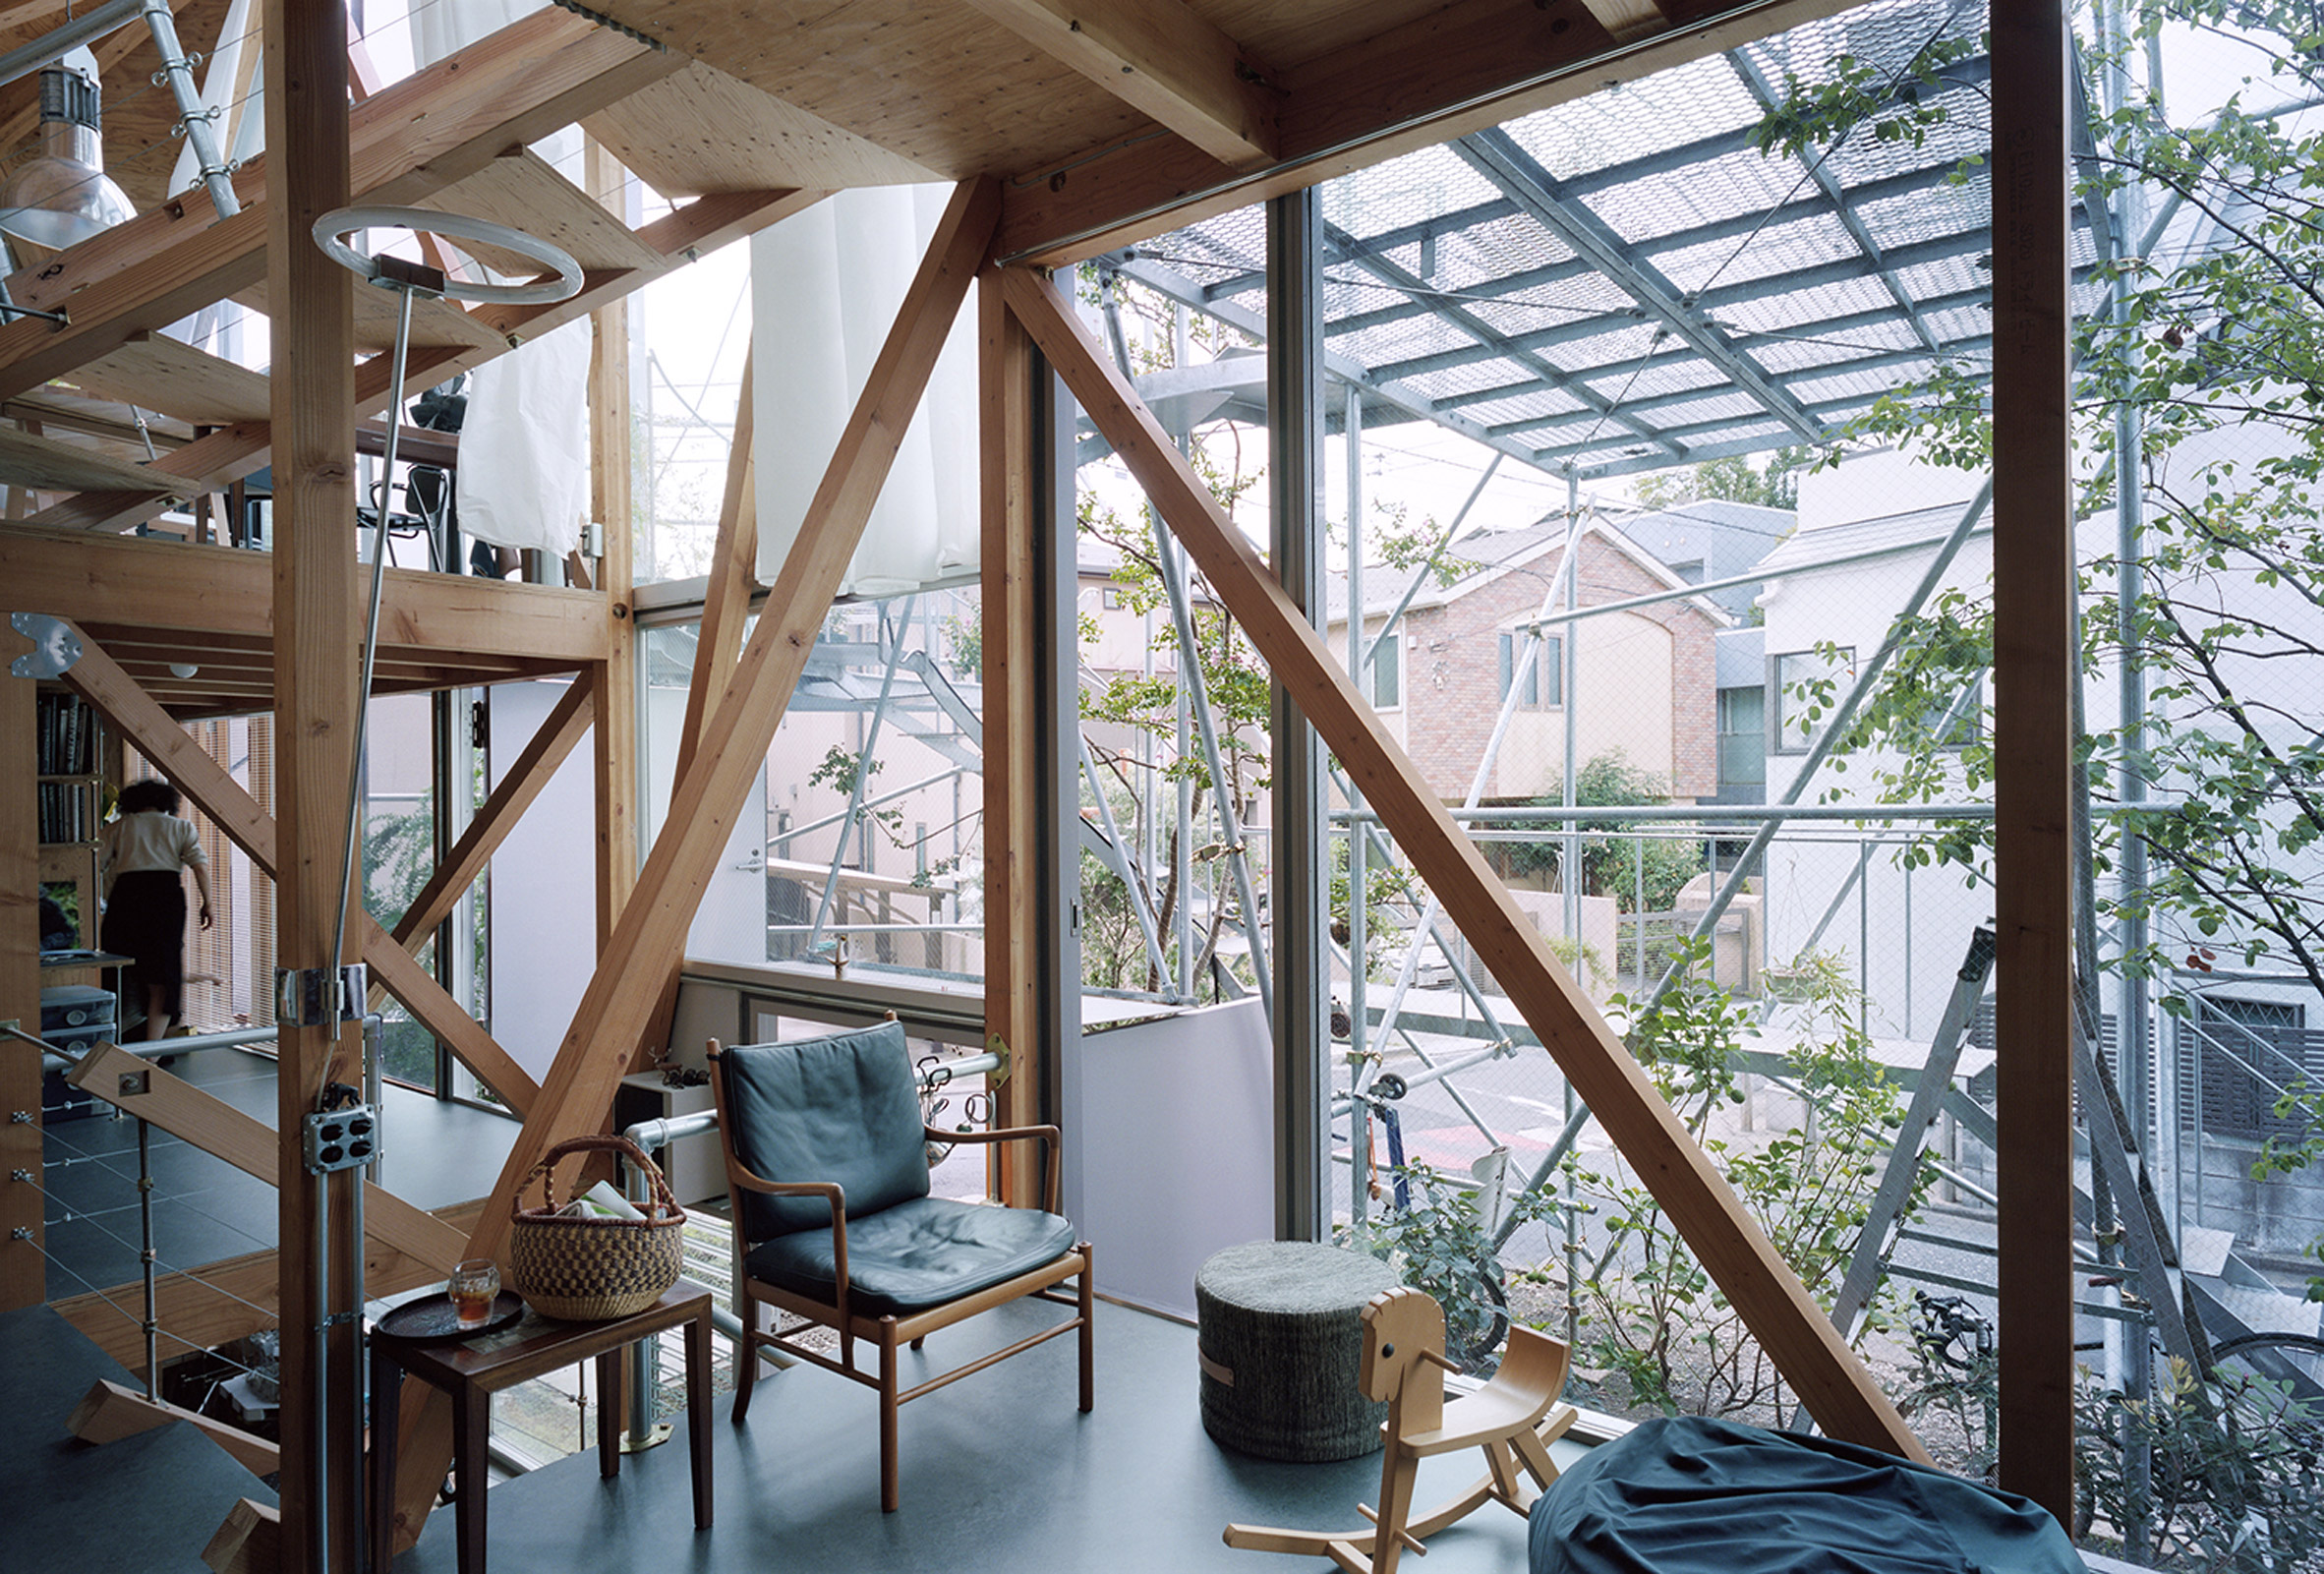 Interior of Japanese house with built-in scaffolding